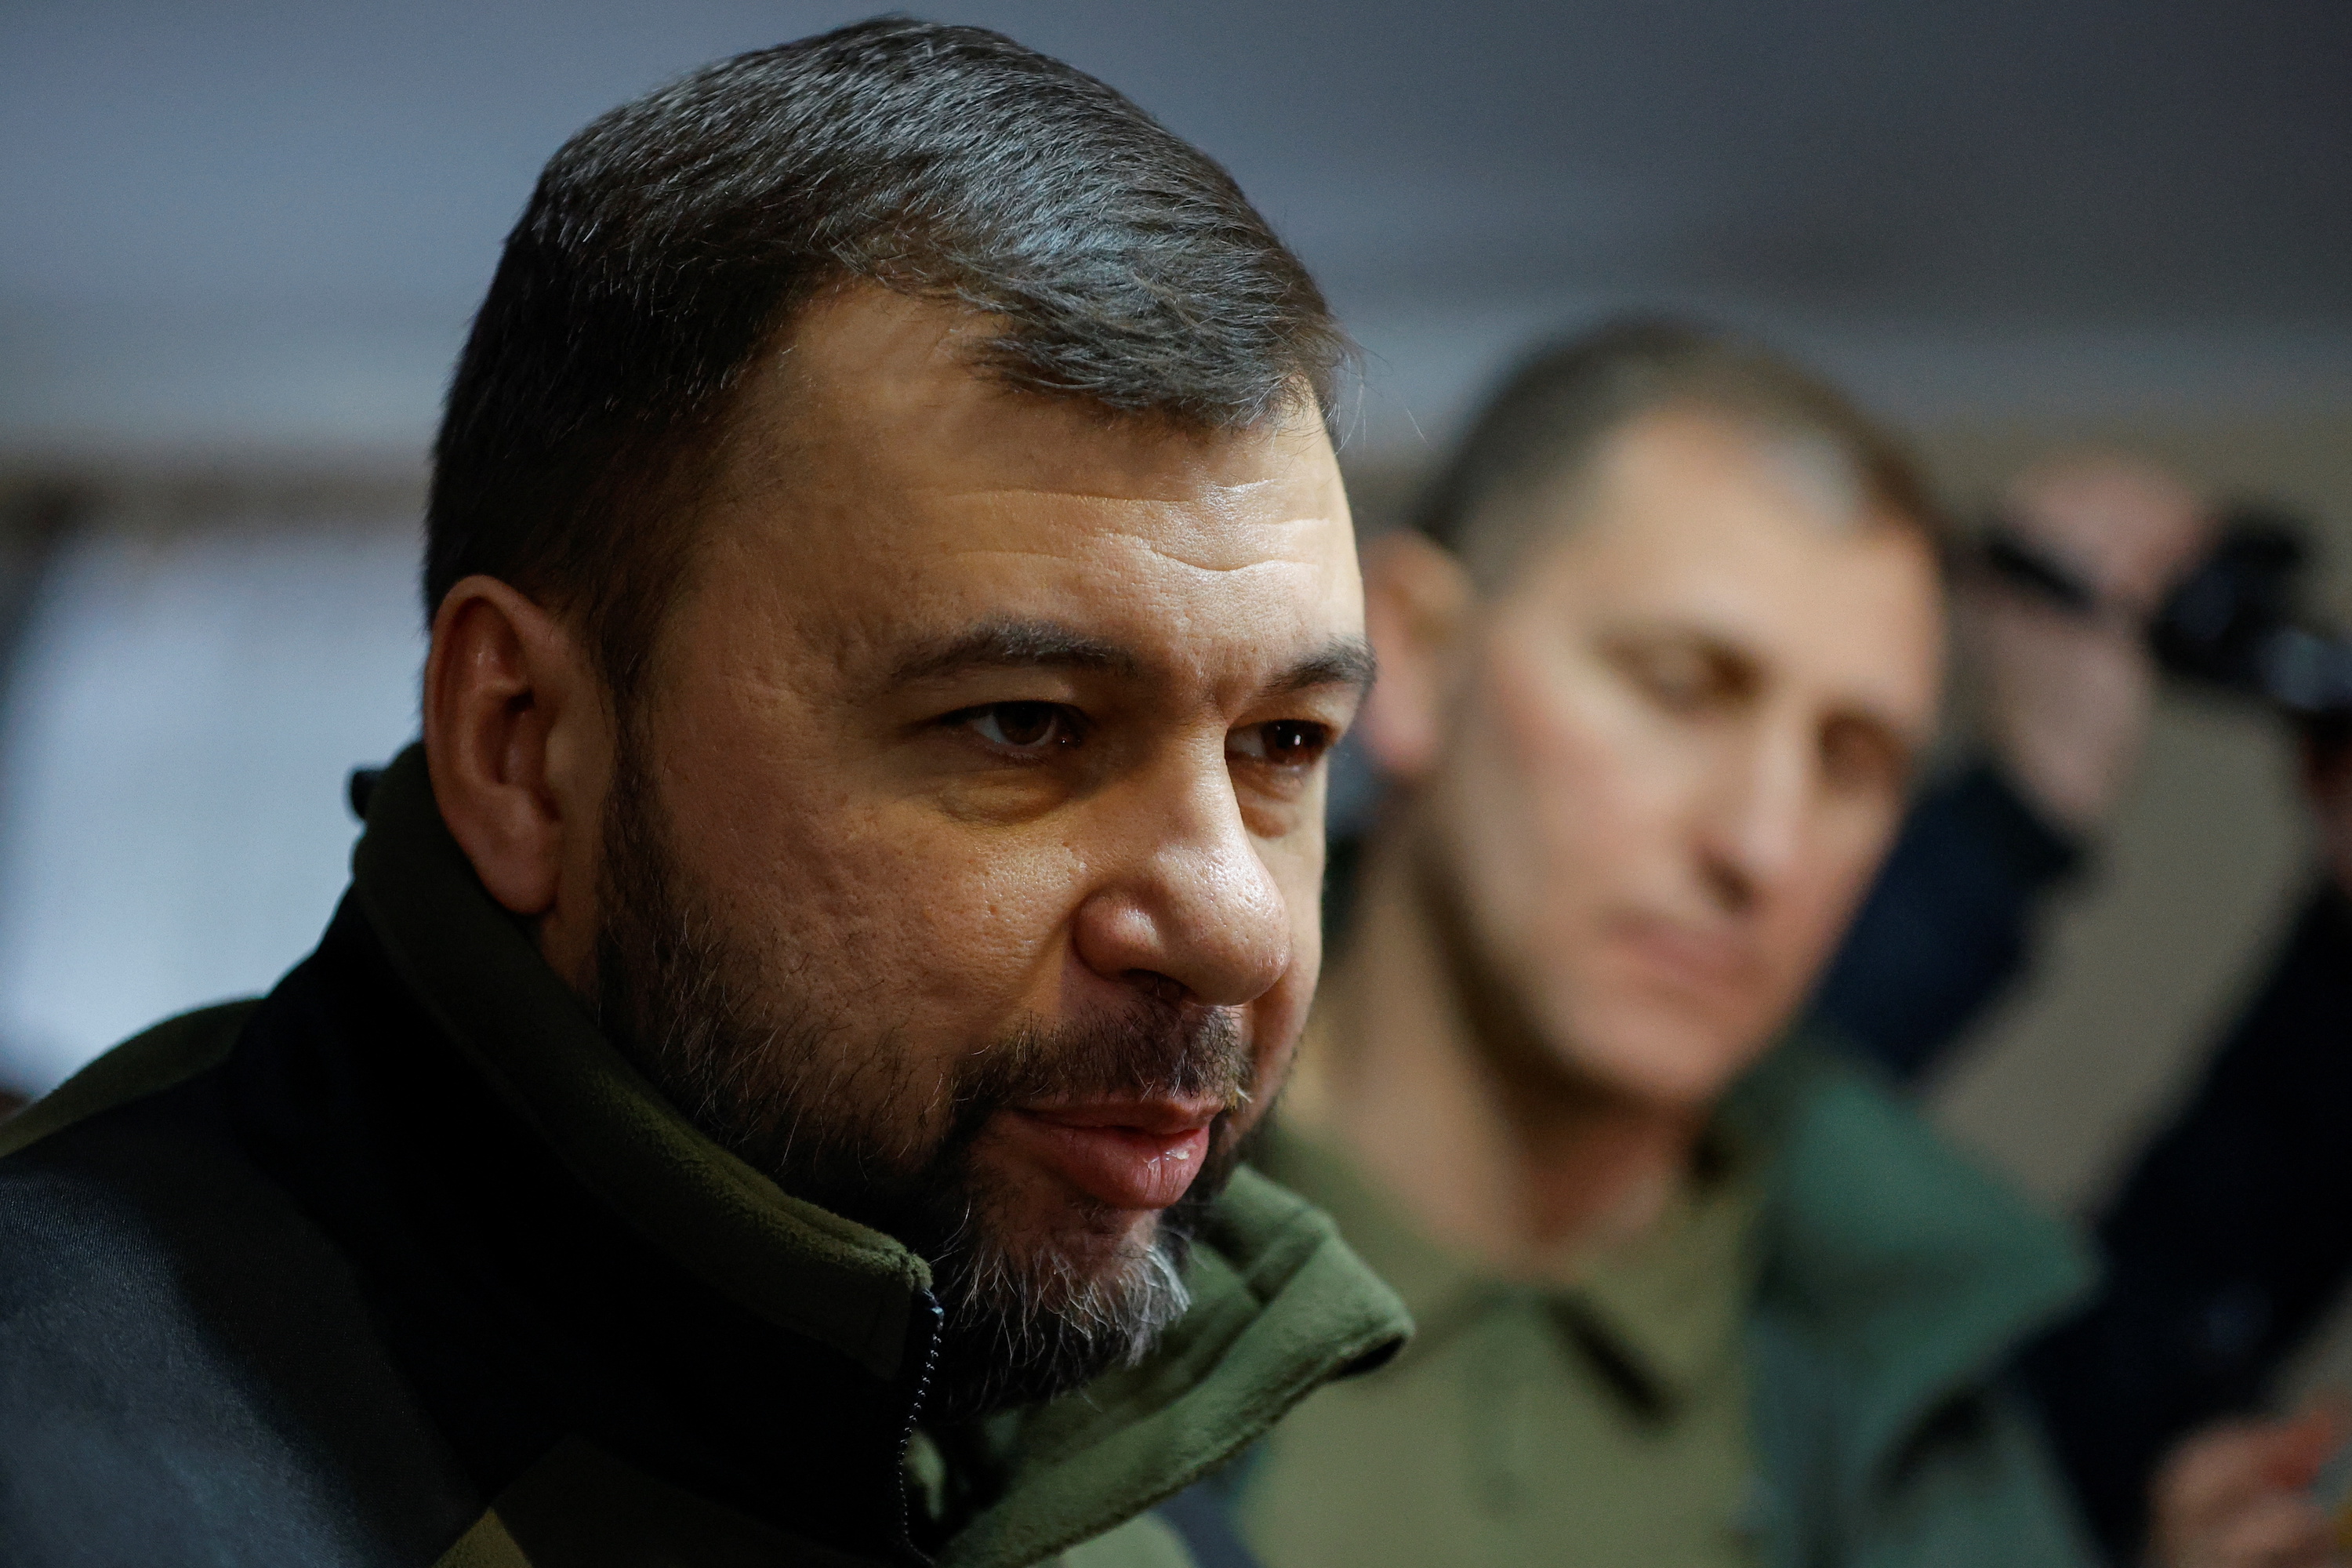 Denis Pushilin, Moscow-installed acting leader of the Russian-controlled parts of Ukraine's Donetsk region, meets with civilians evacuated from the salt-mining town of Soledar in the course of Russia-Ukraine conflict at a temporary accommodation centre located in a local dormitory in Shakhtarsk (Shakhtyorsk), Russian-controlled Ukraine on January 14, 2023.